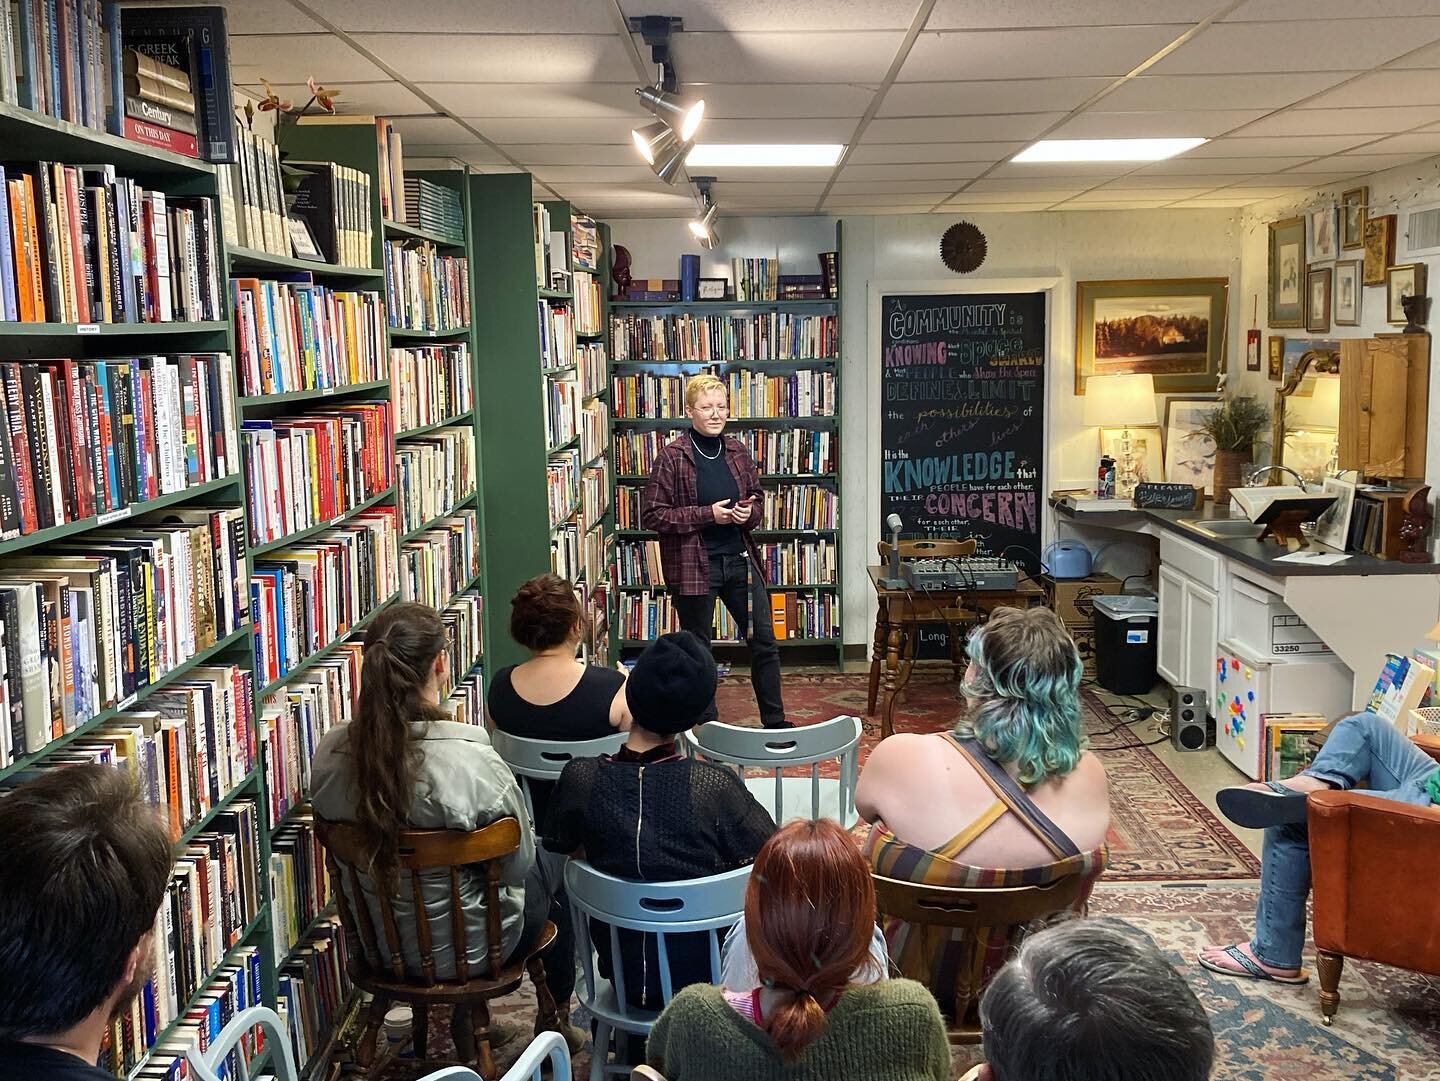 Our first Open Mic Night last week was such a special time! Thank you so much to everyone who came and shared. We hope to have more events like this in the future! 
💛
#openmicnight #usedbookstore #poetryreading #bookstoreevents #shopsmall #buylocal 